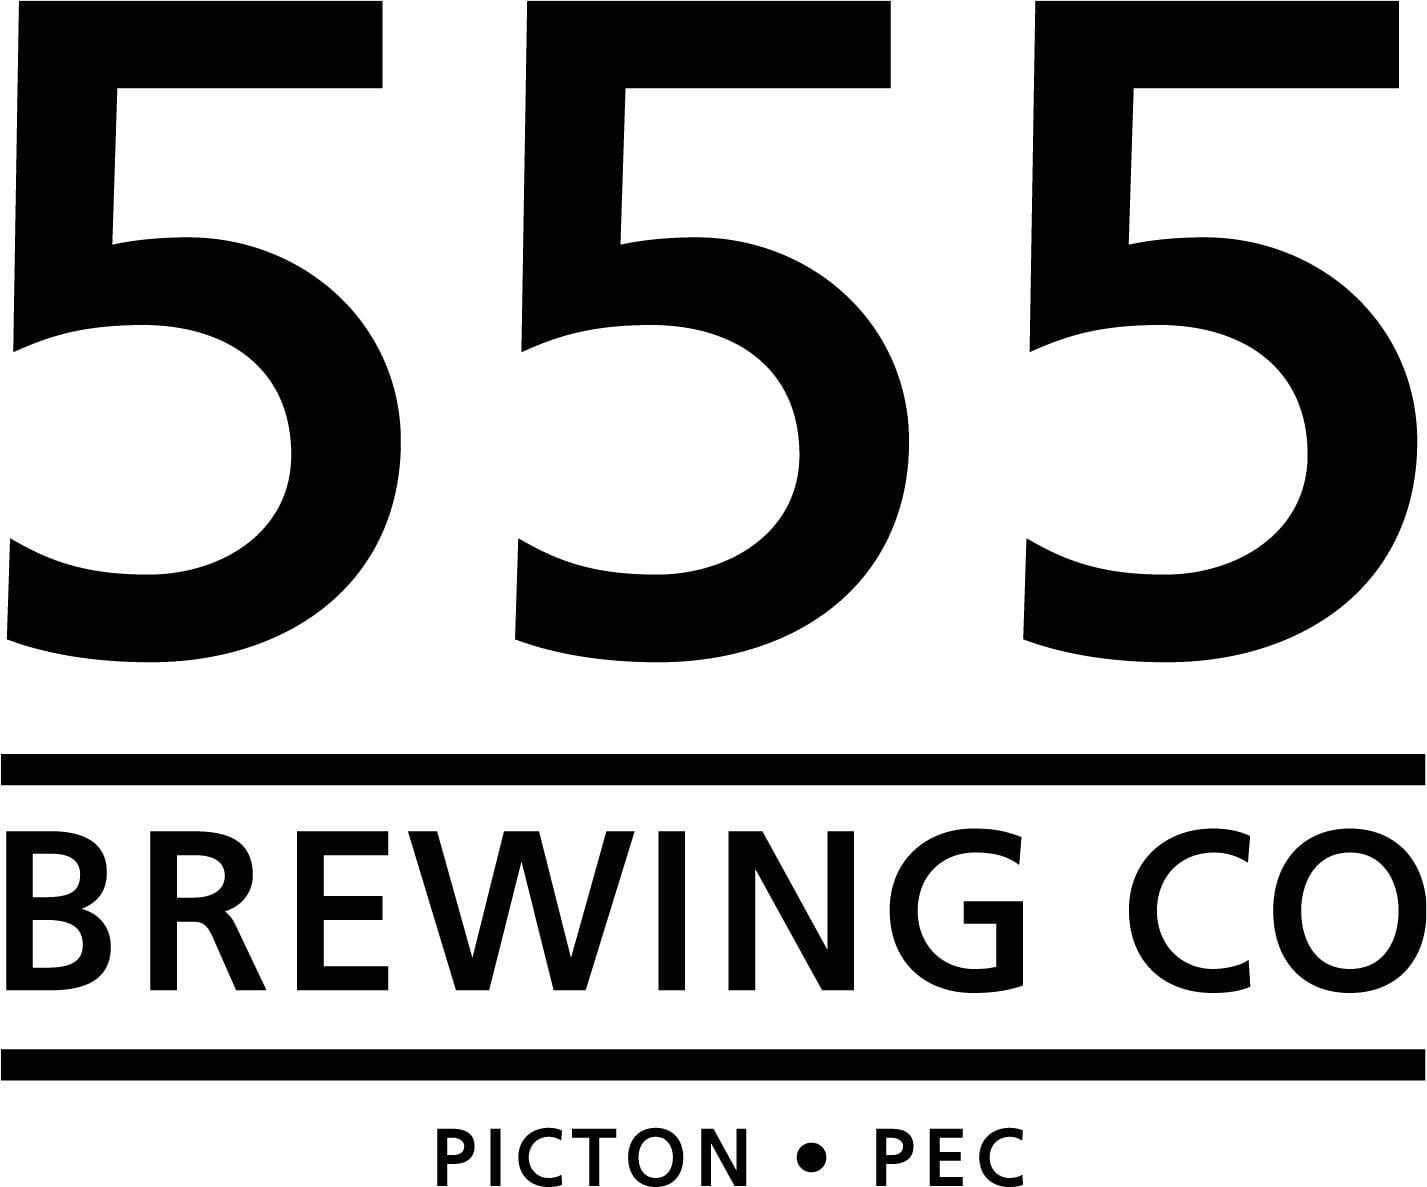 555  Brewing Co